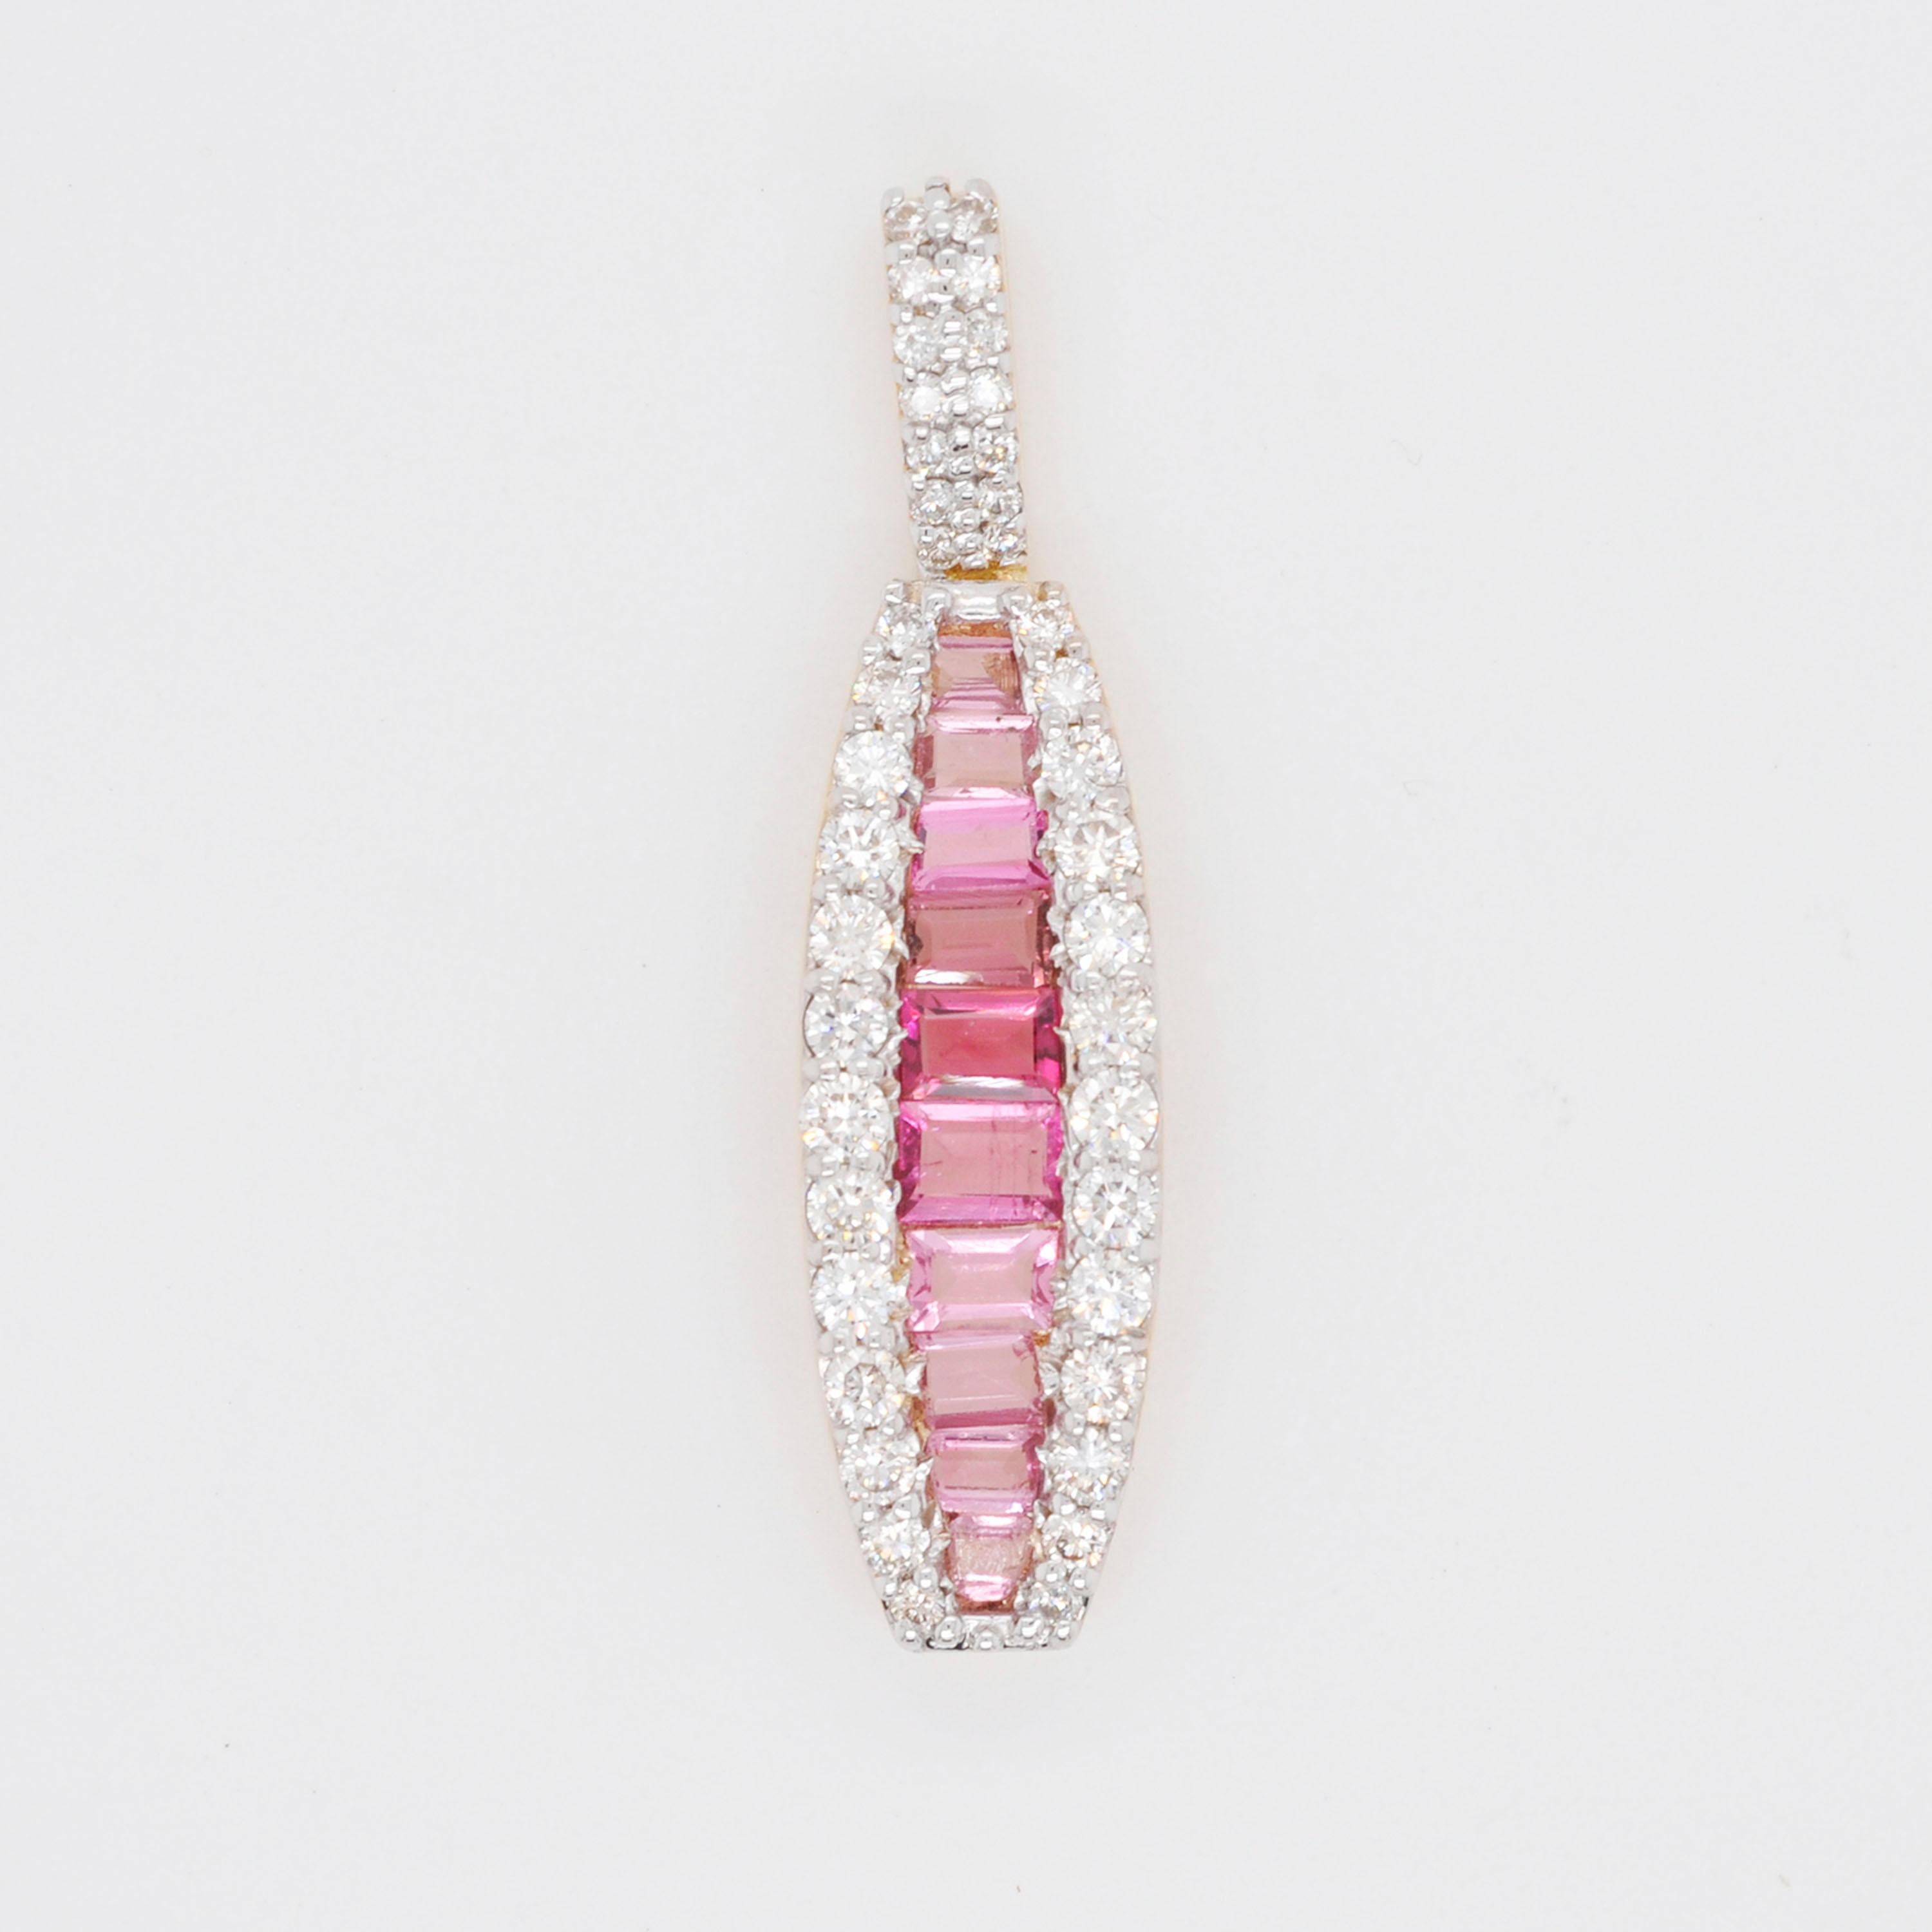 18 karat gold pink tourmaline diamond huggies pendant necklace earrings ring set.

Art, color and culture all come together to inspire this delicate linear channel set pink tourmaline baguette huggies pendant earrings ring set, where the pleasant